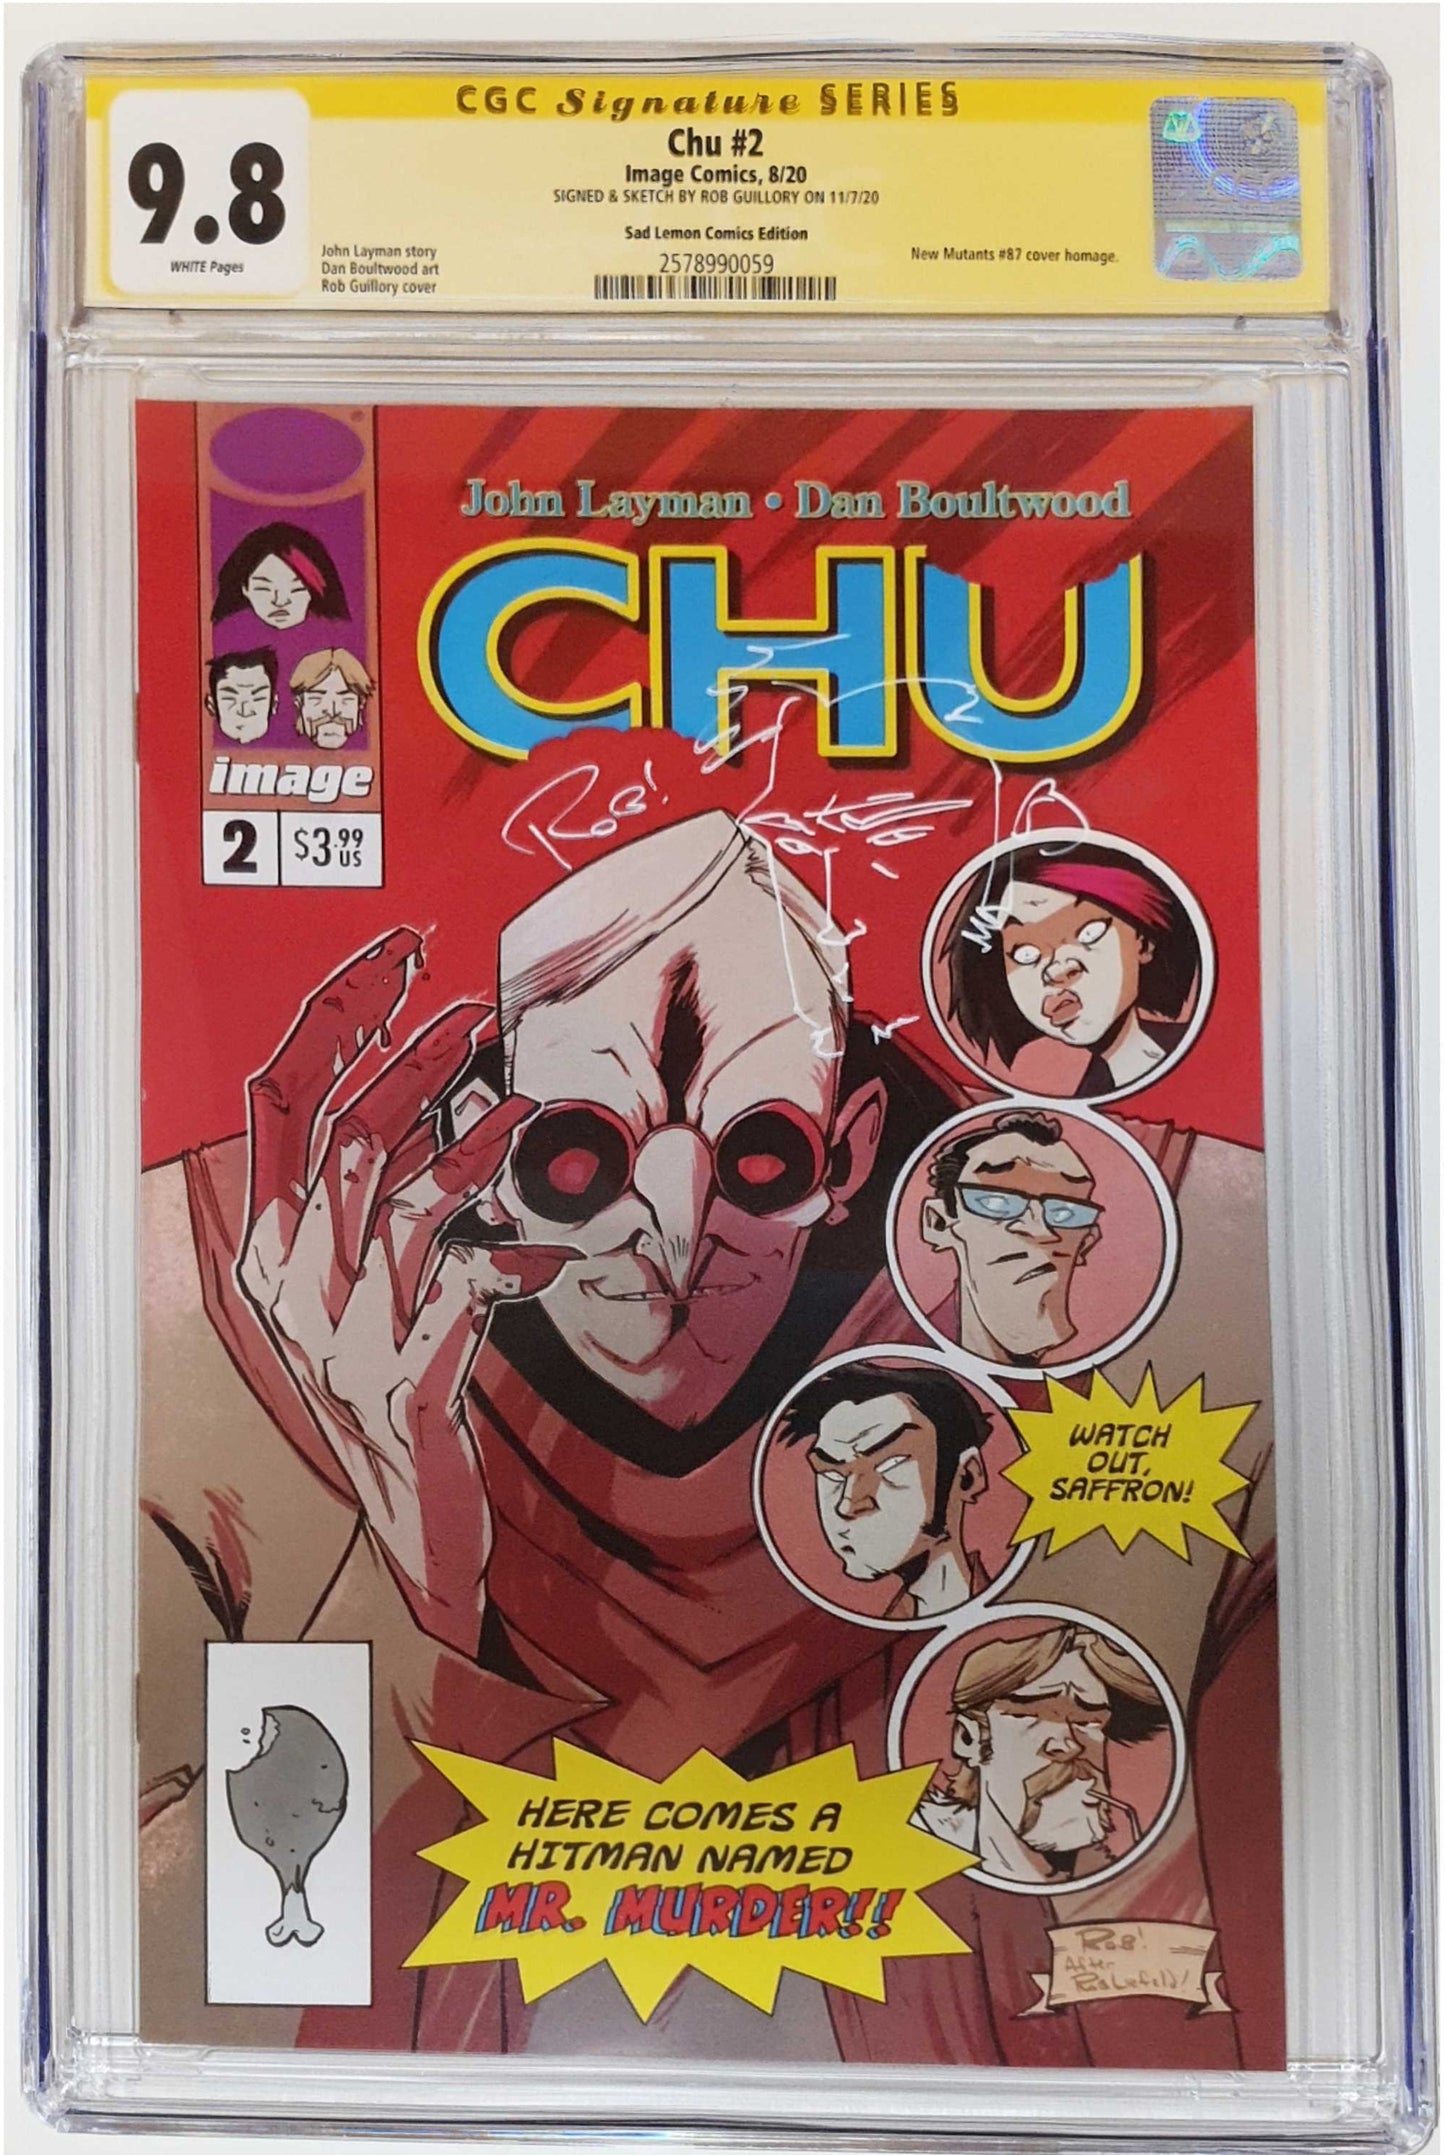 CHU #2 ROB GUILLORY NEW MUTANTS 87 HOMAGE VARIANT LIMITED TO 500 CGC 9.8 TONY REMARK